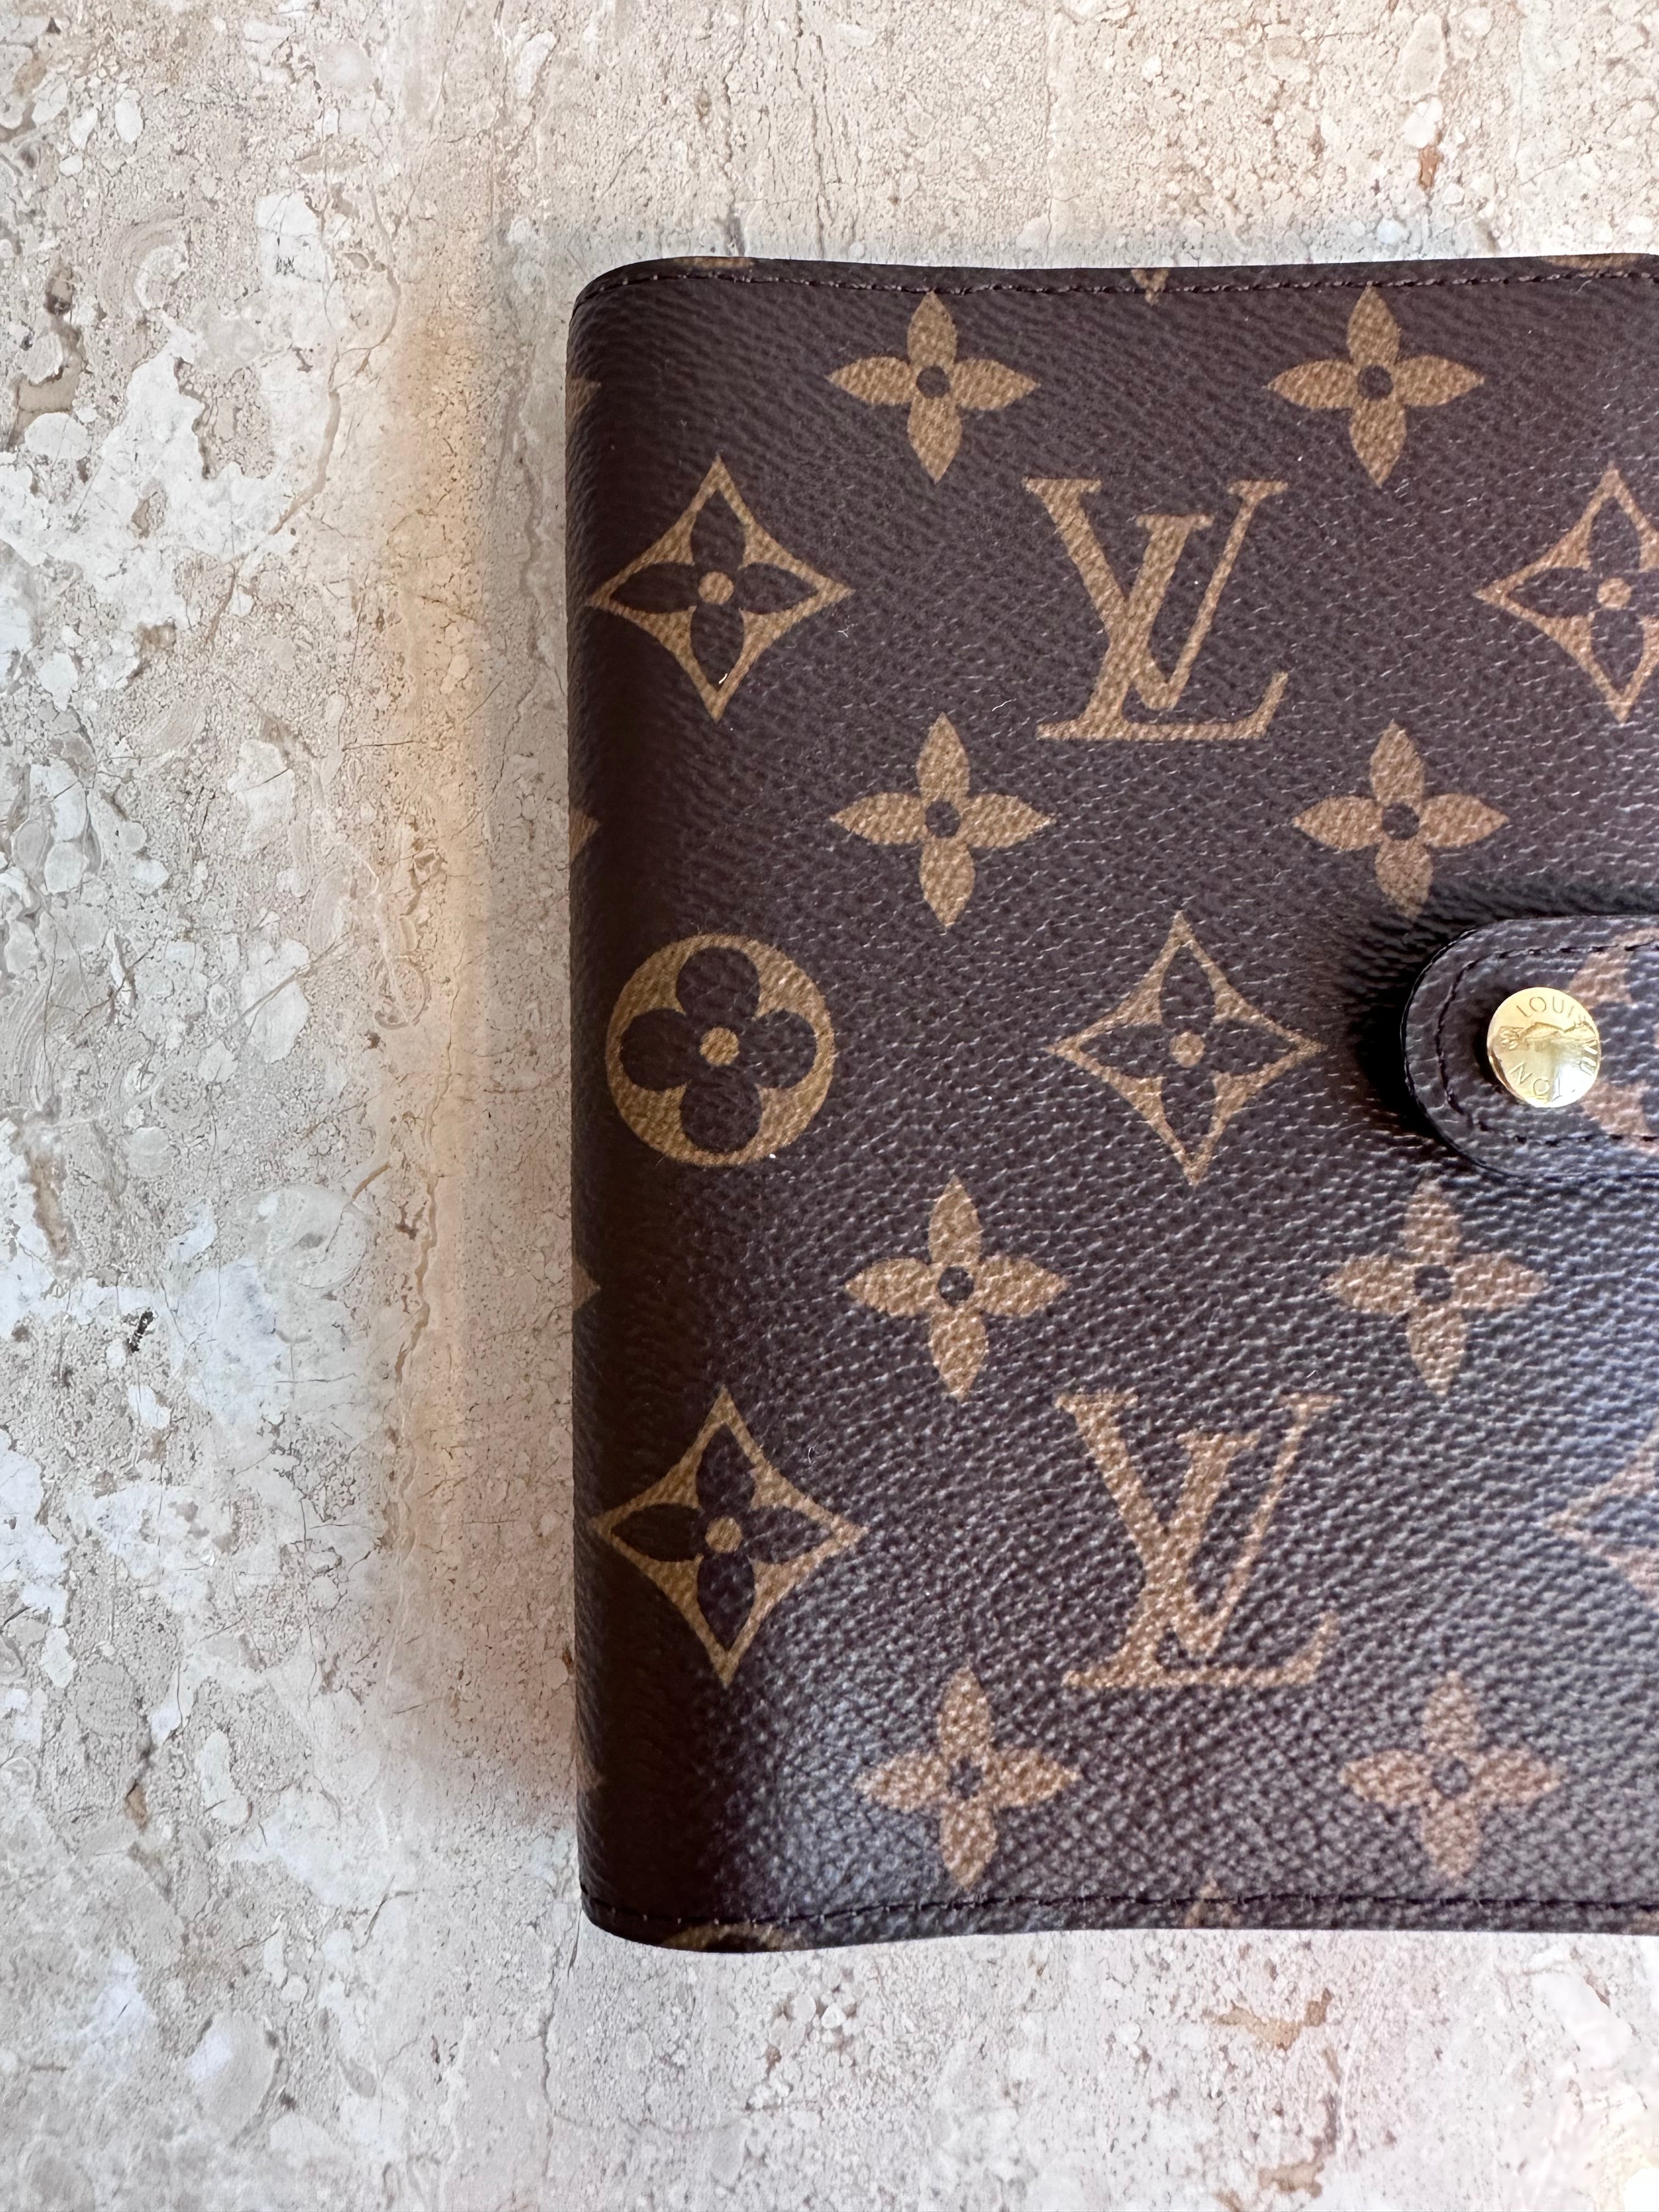 Pre-Owned LOUIS VUITTON Monogram Small Ring Agenda Cover